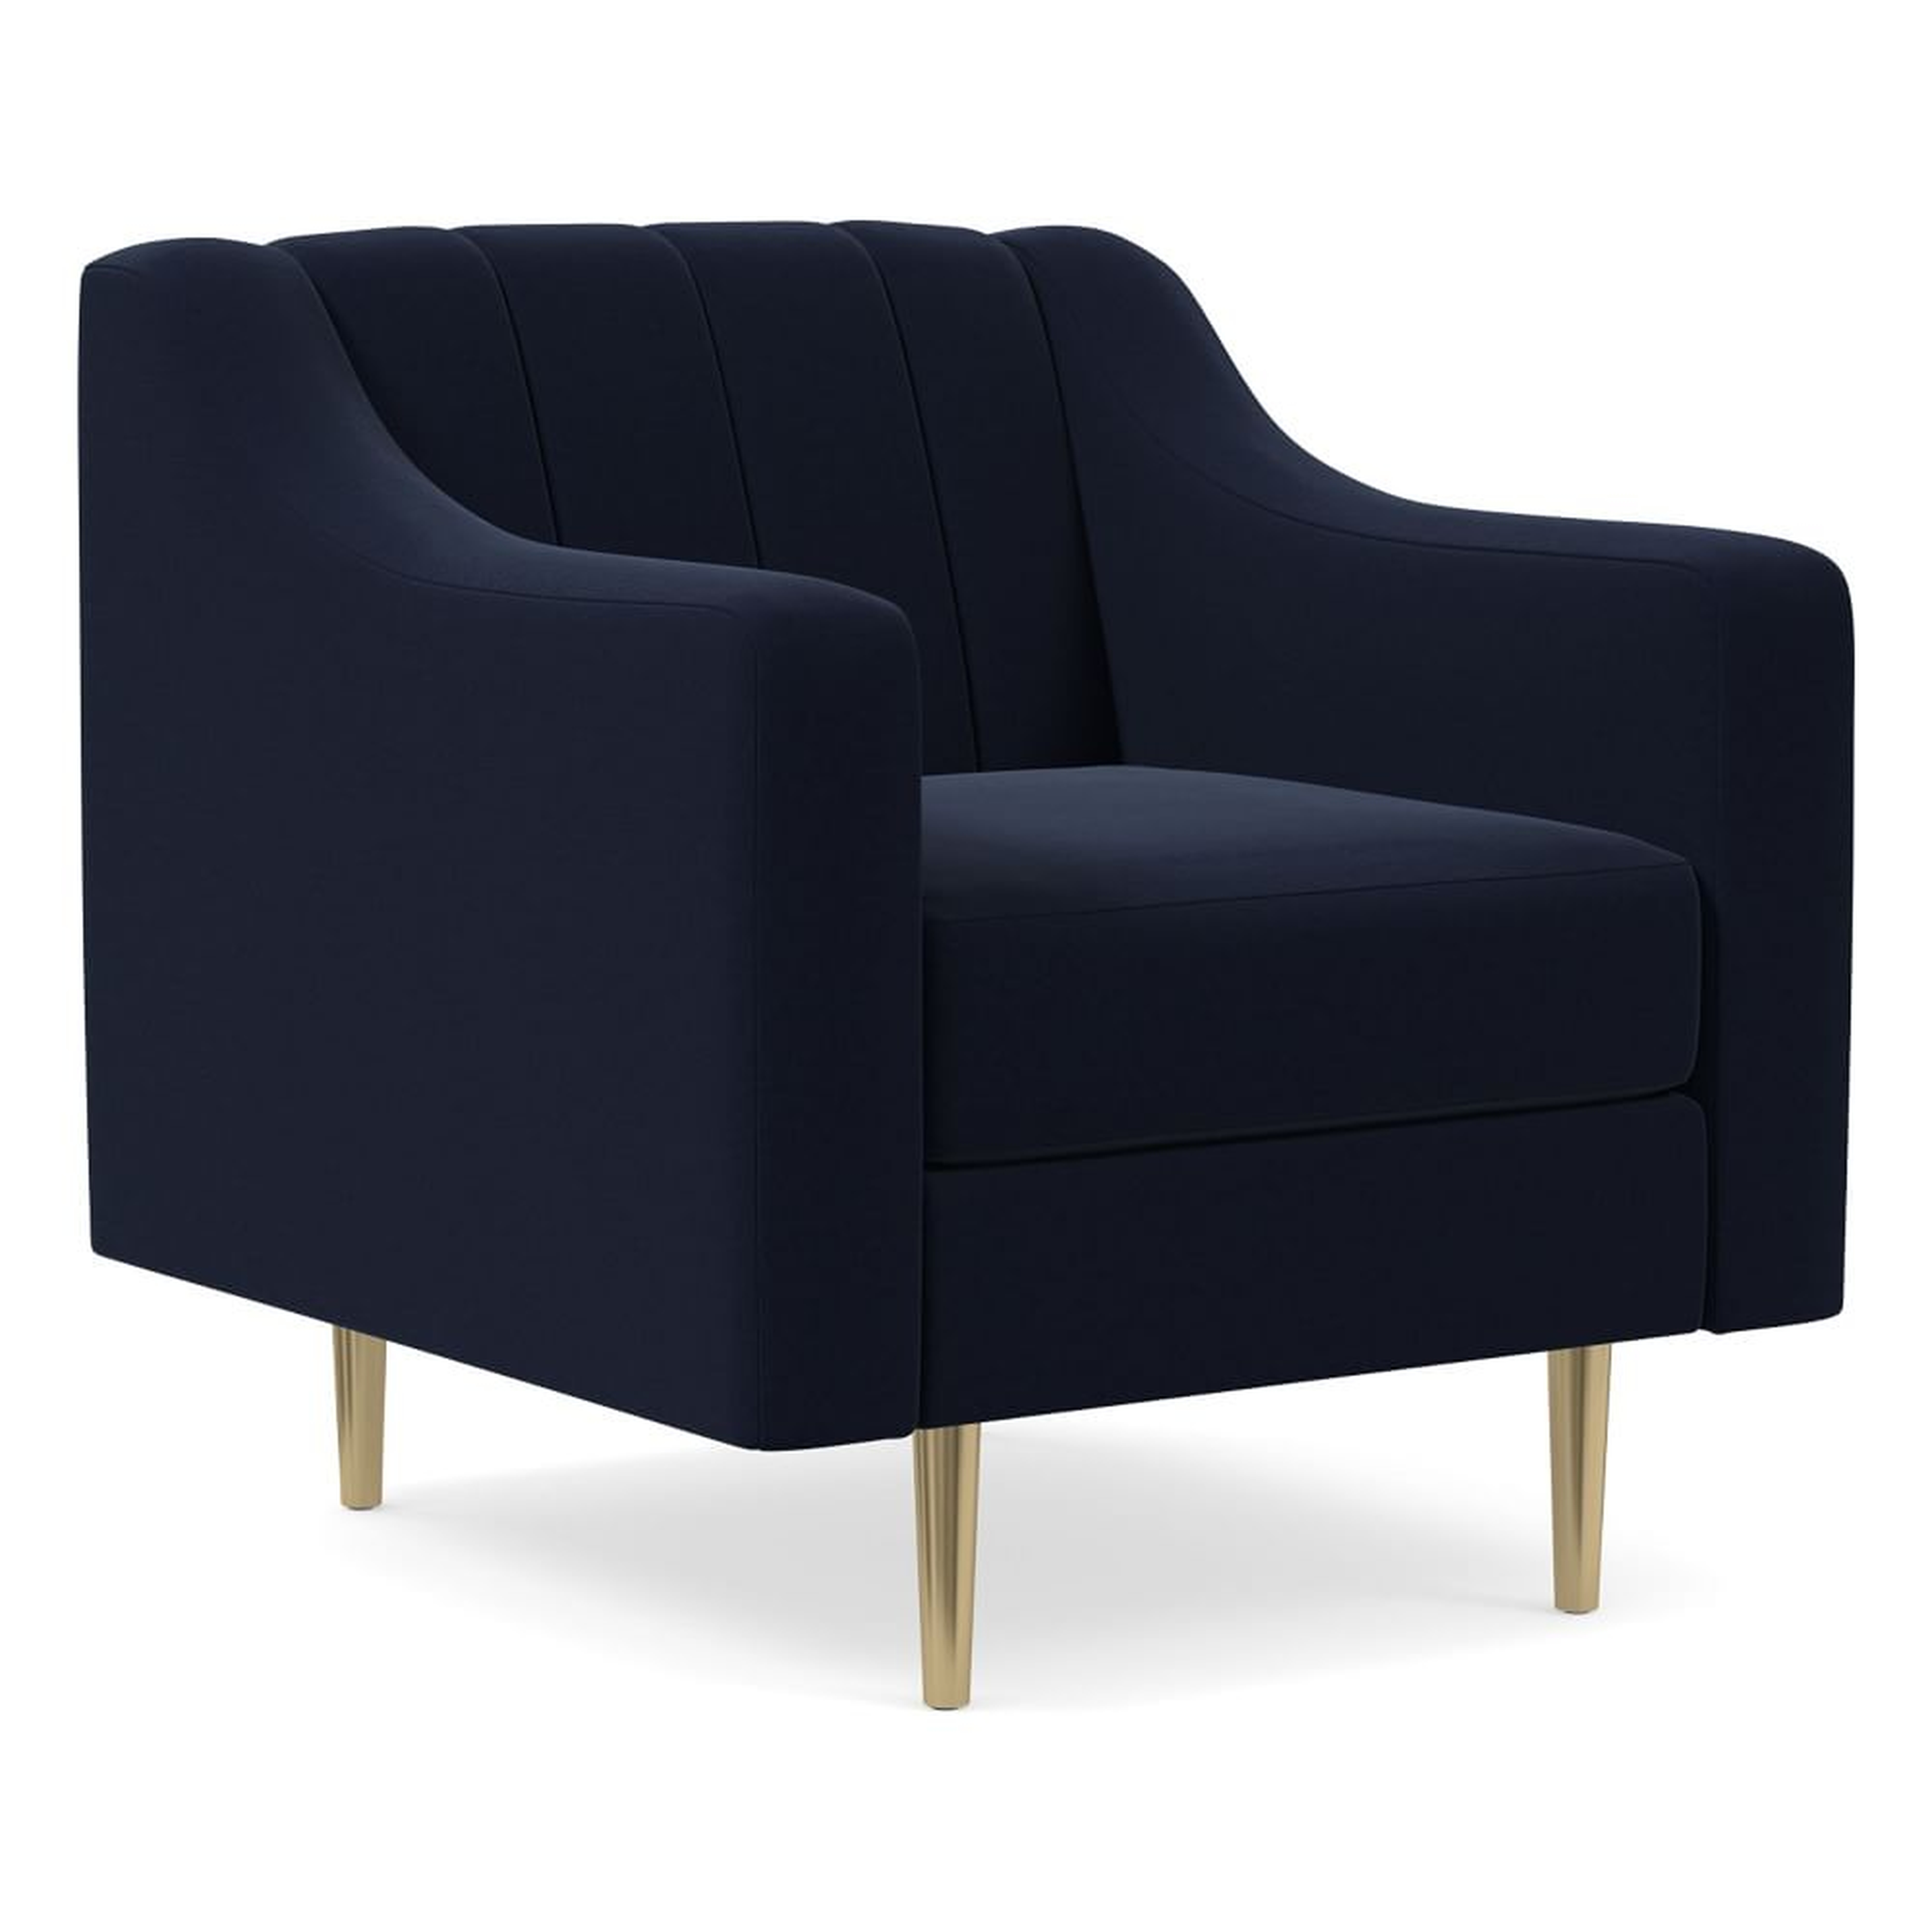 Olive Channel Back Swoop Arm Chair, Poly, Distressed Velvet, Midnight, Antique Brass - West Elm